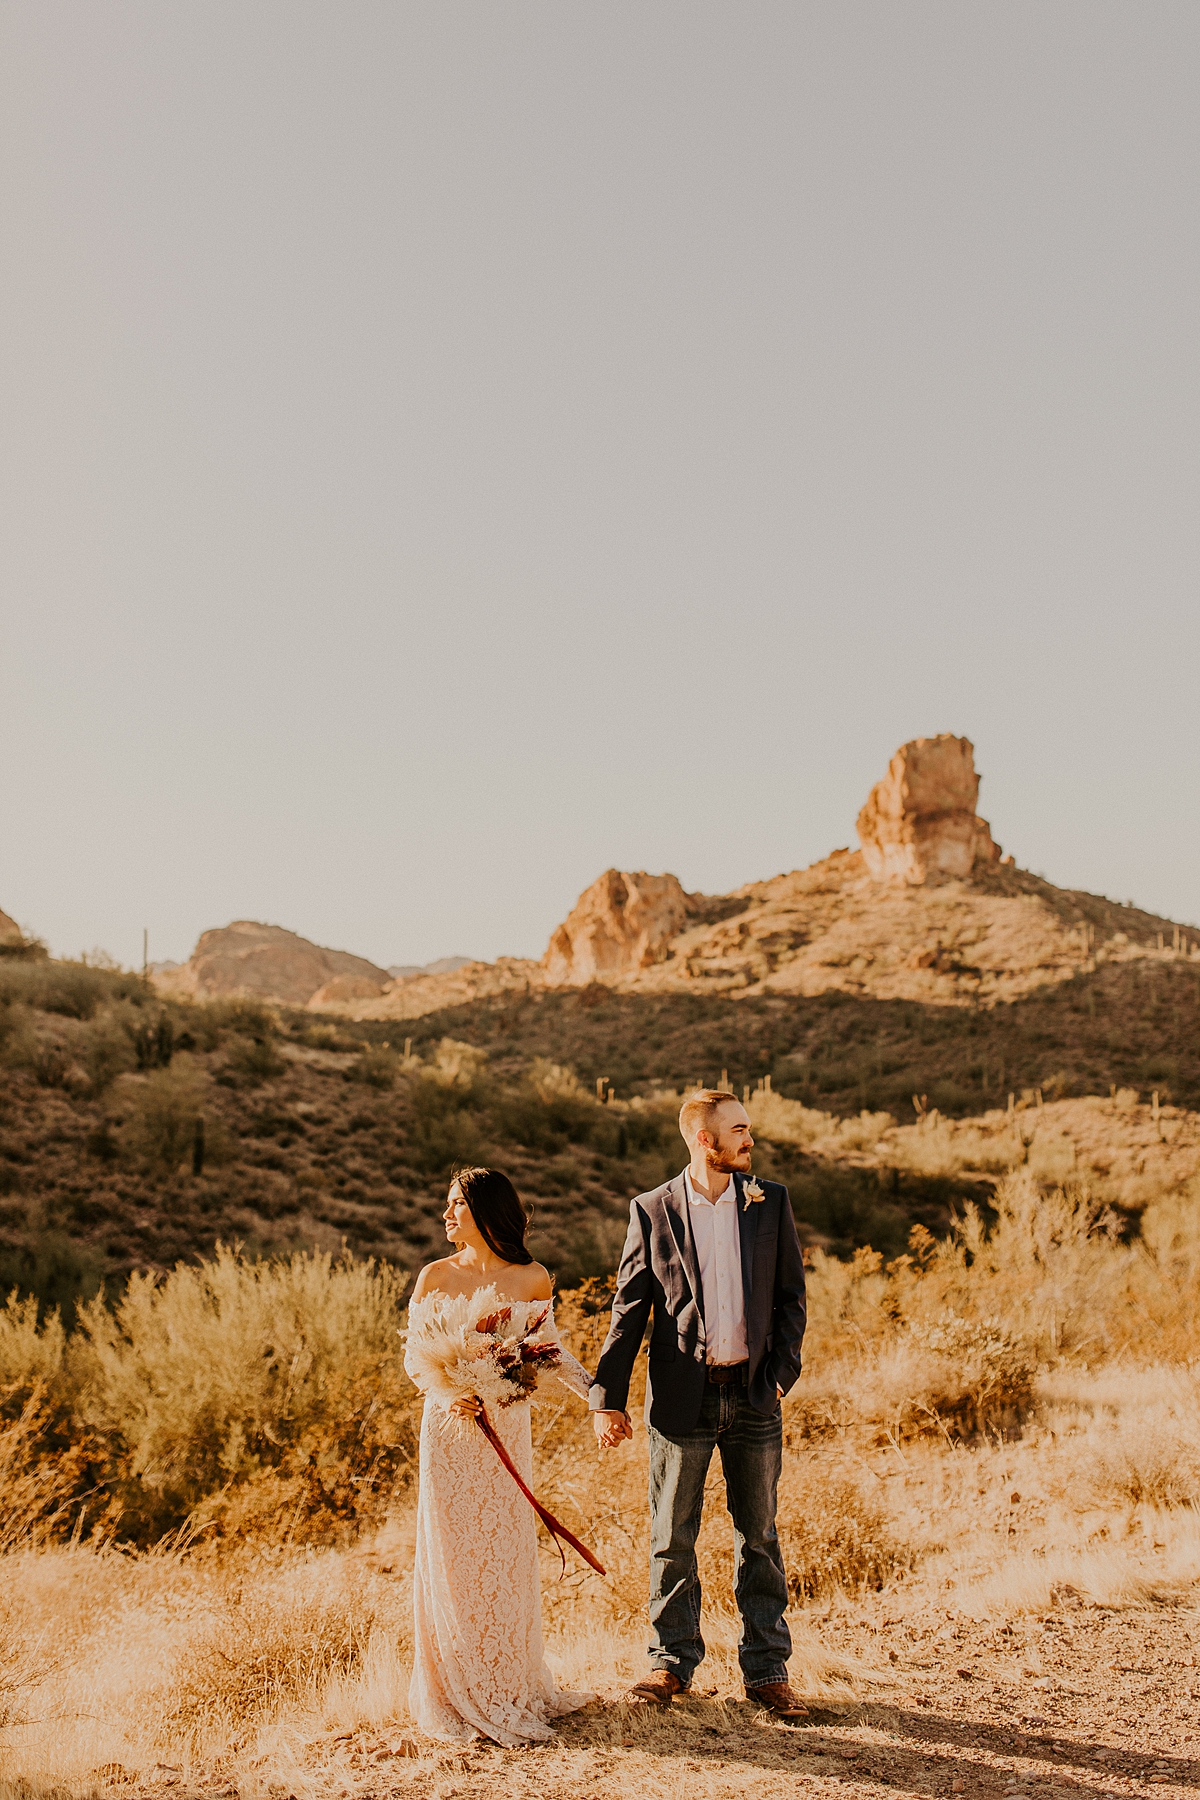 Intimate-elopement-in-superstition-mountain-wilderness-allison-slater-photography43.jpg